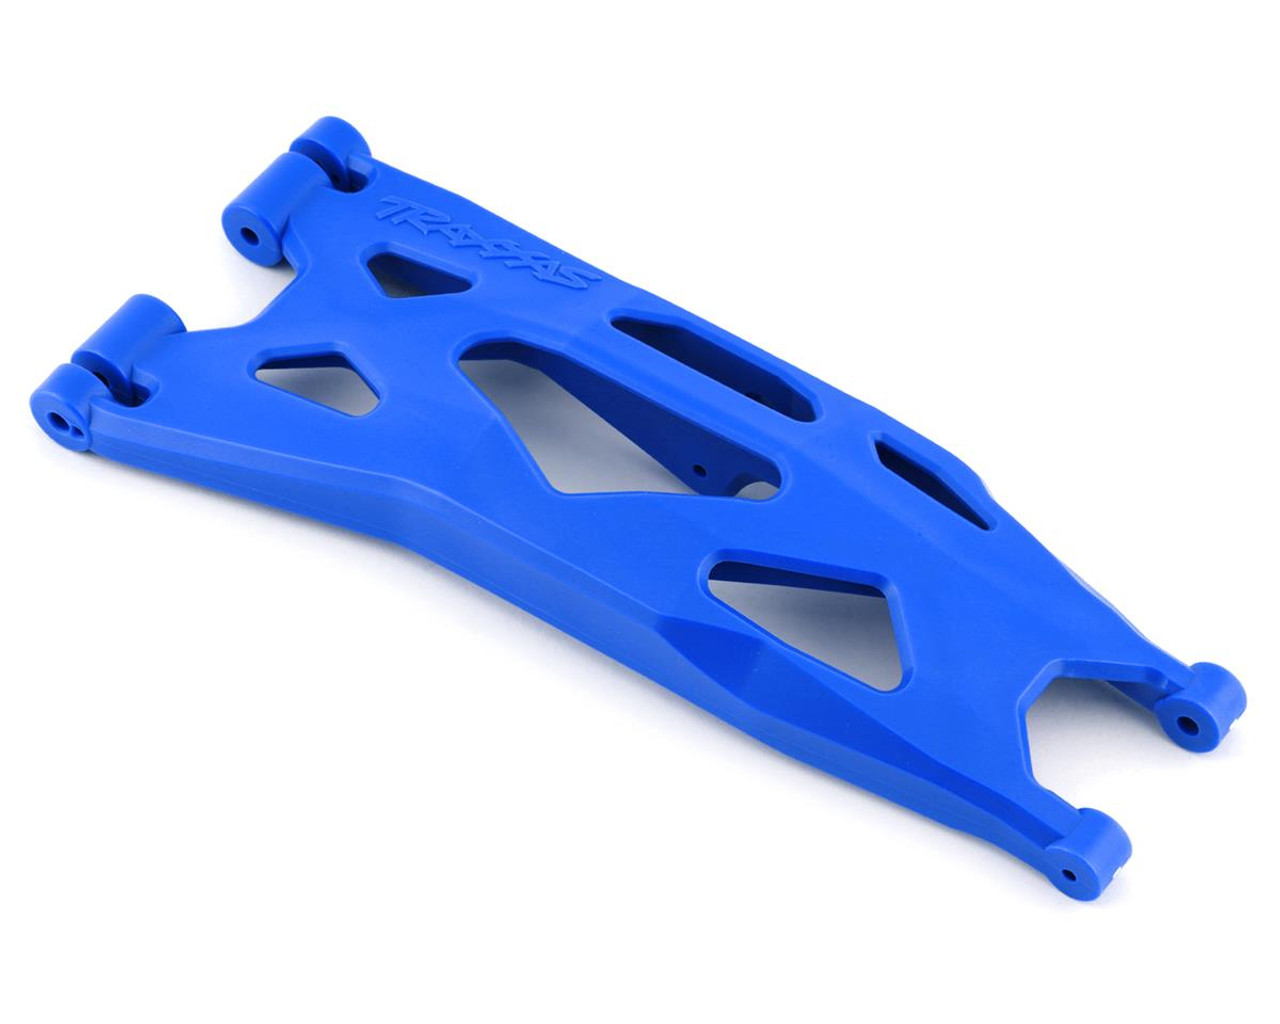 Traxxas 7894X Suspension Arm, Lower, Blue (left, front or rear) (for use with #7895 X-Maxx® WideMaxx® suspension kit)